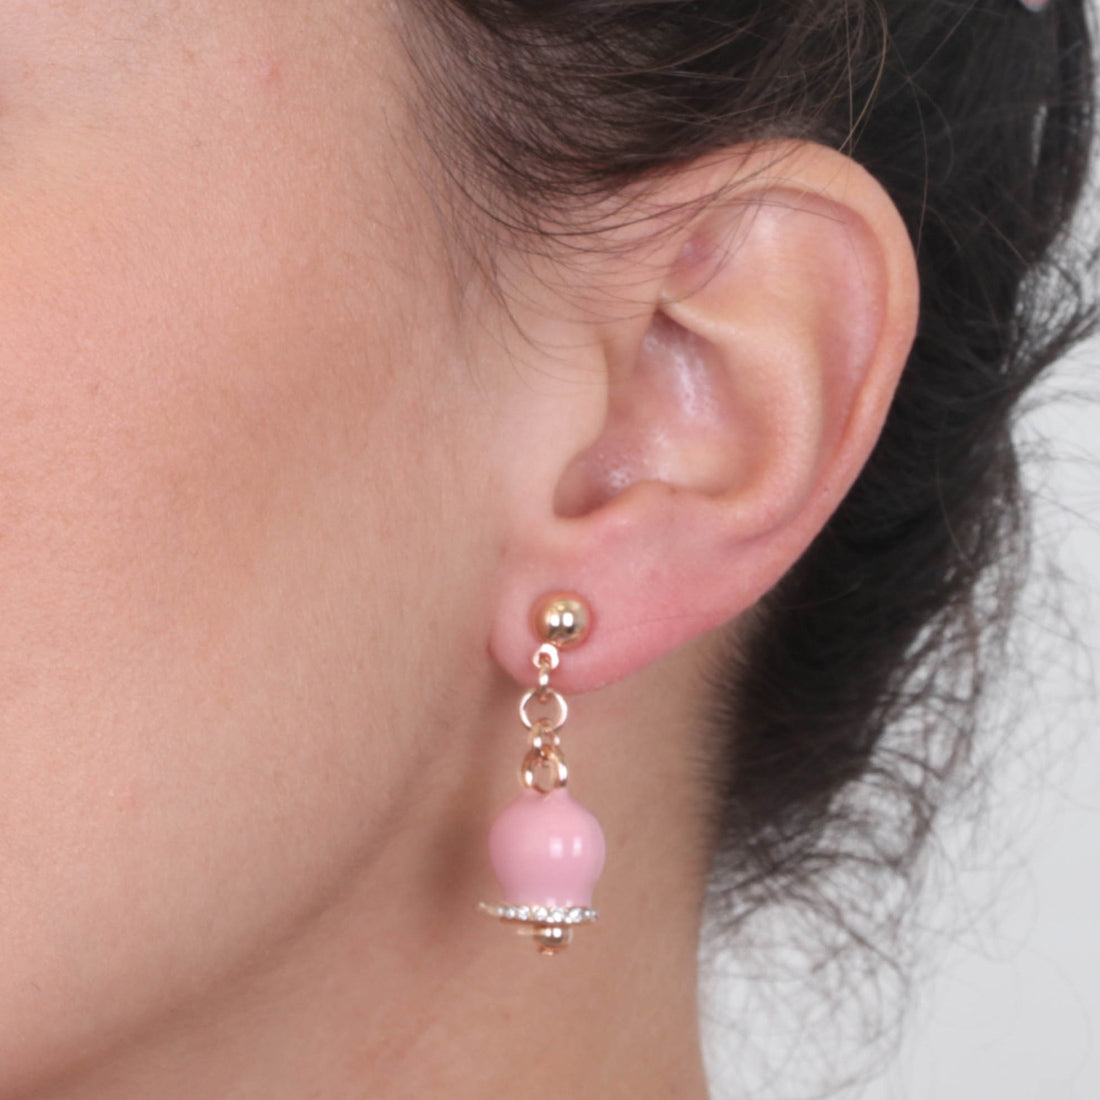 Metal earrings with pendant lucky charming bell, embellished with pink enamel and crystals